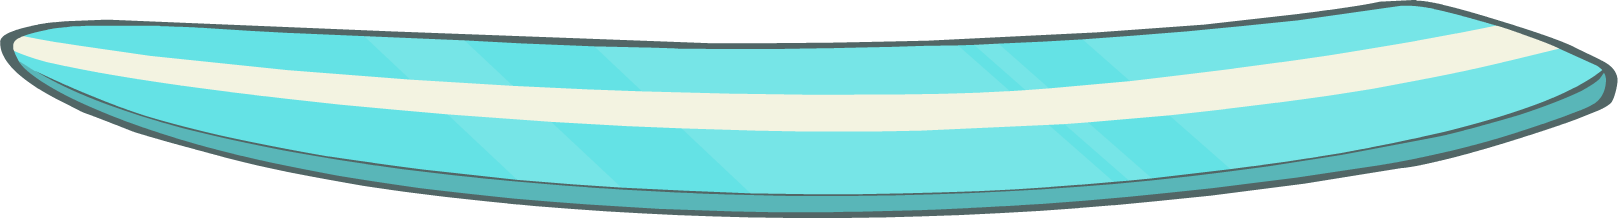 Blue Striped Surfboard Graphic PNG image